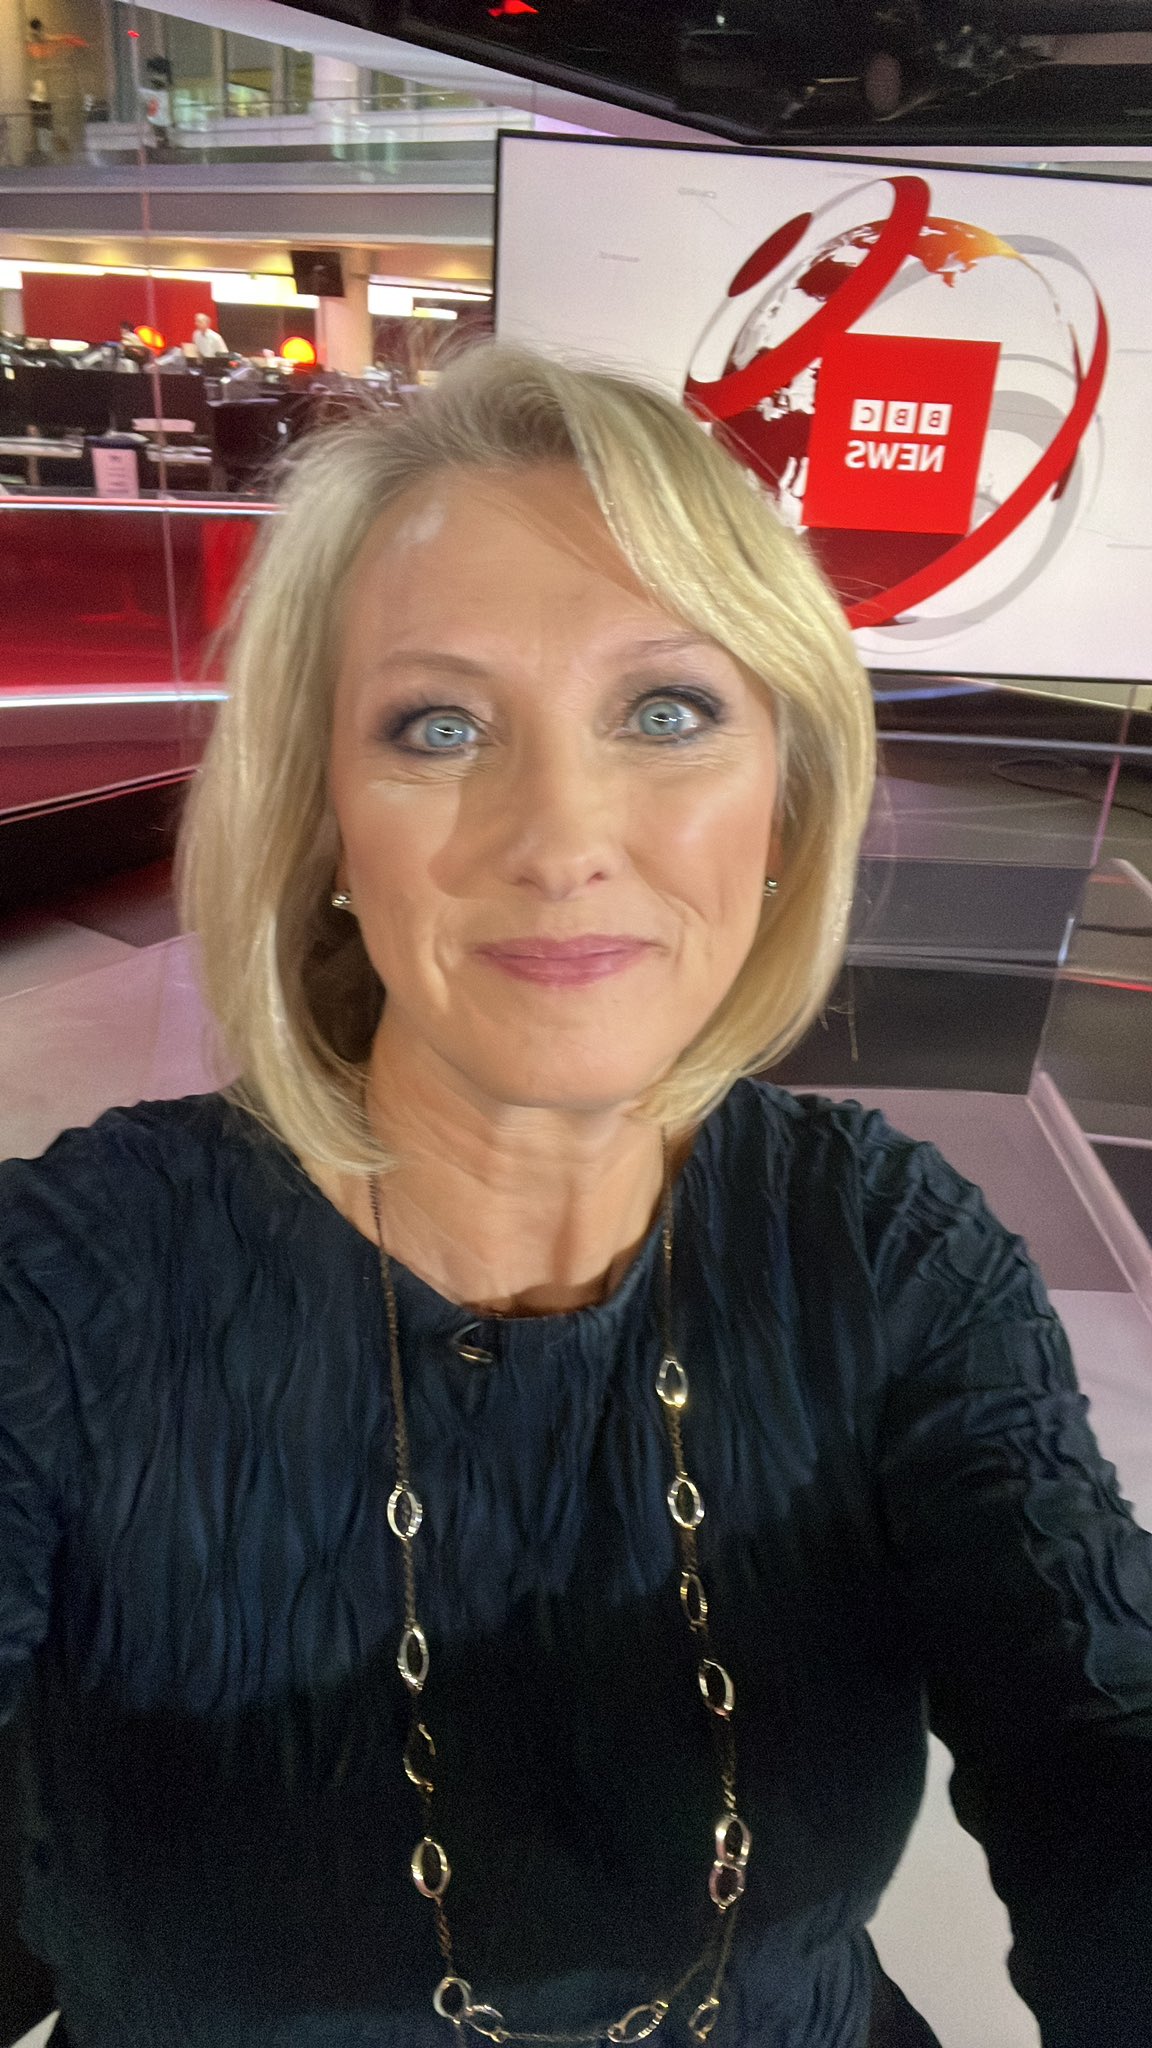 BBC News host flooded with support as she signs off from last ever show amid string of axes